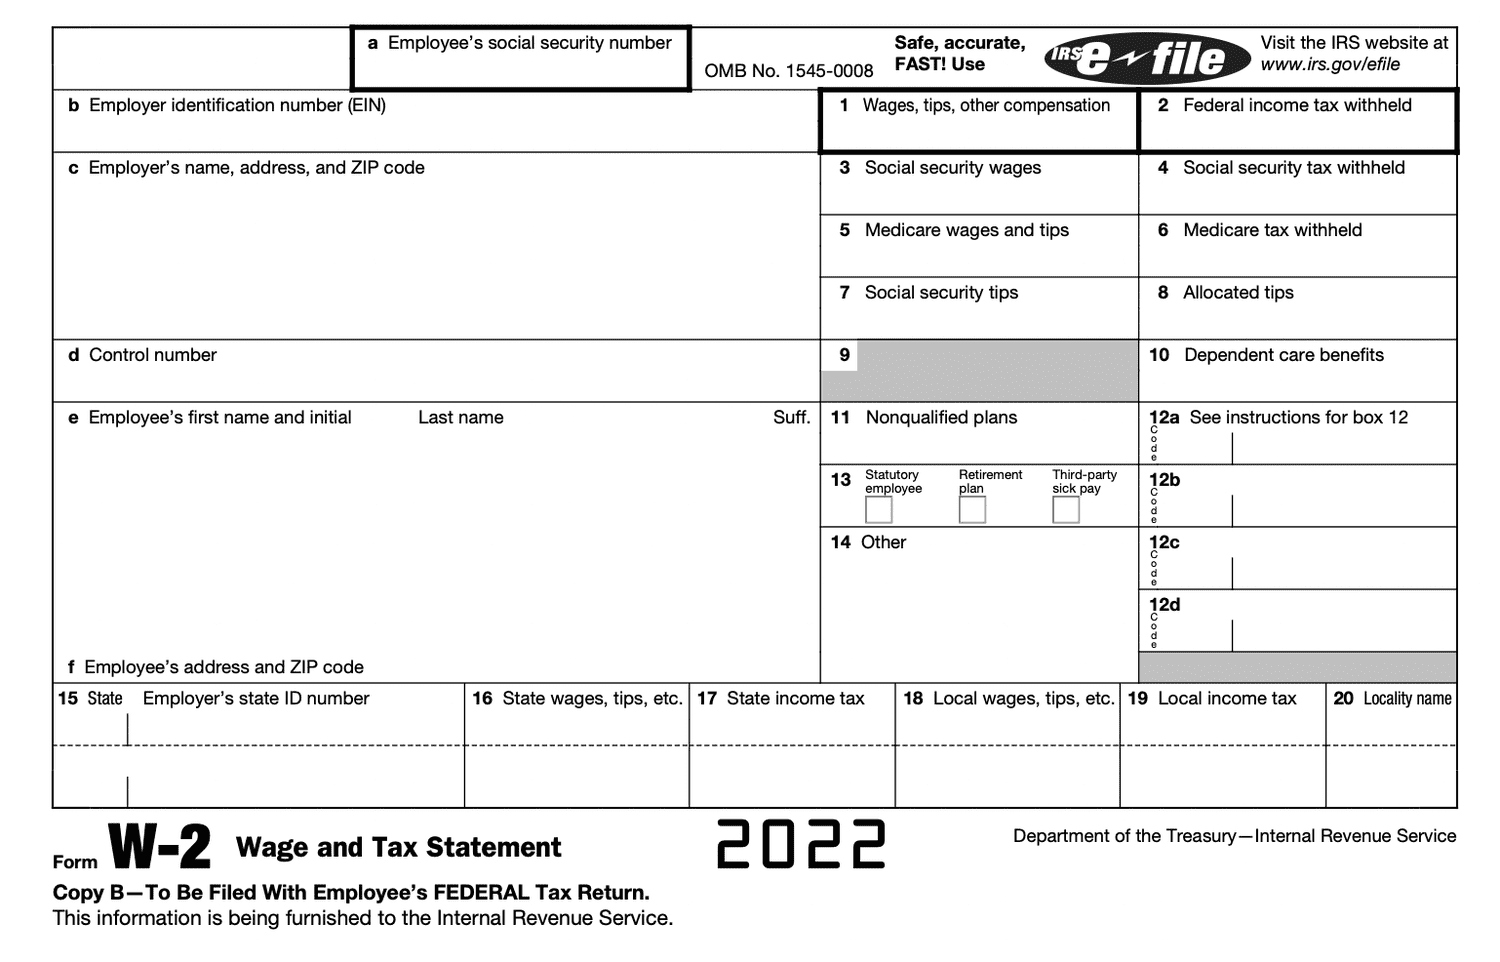 Form W-2 Wage And Tax Statement: What It Is And How To Read It in Ein Number On W2 Form